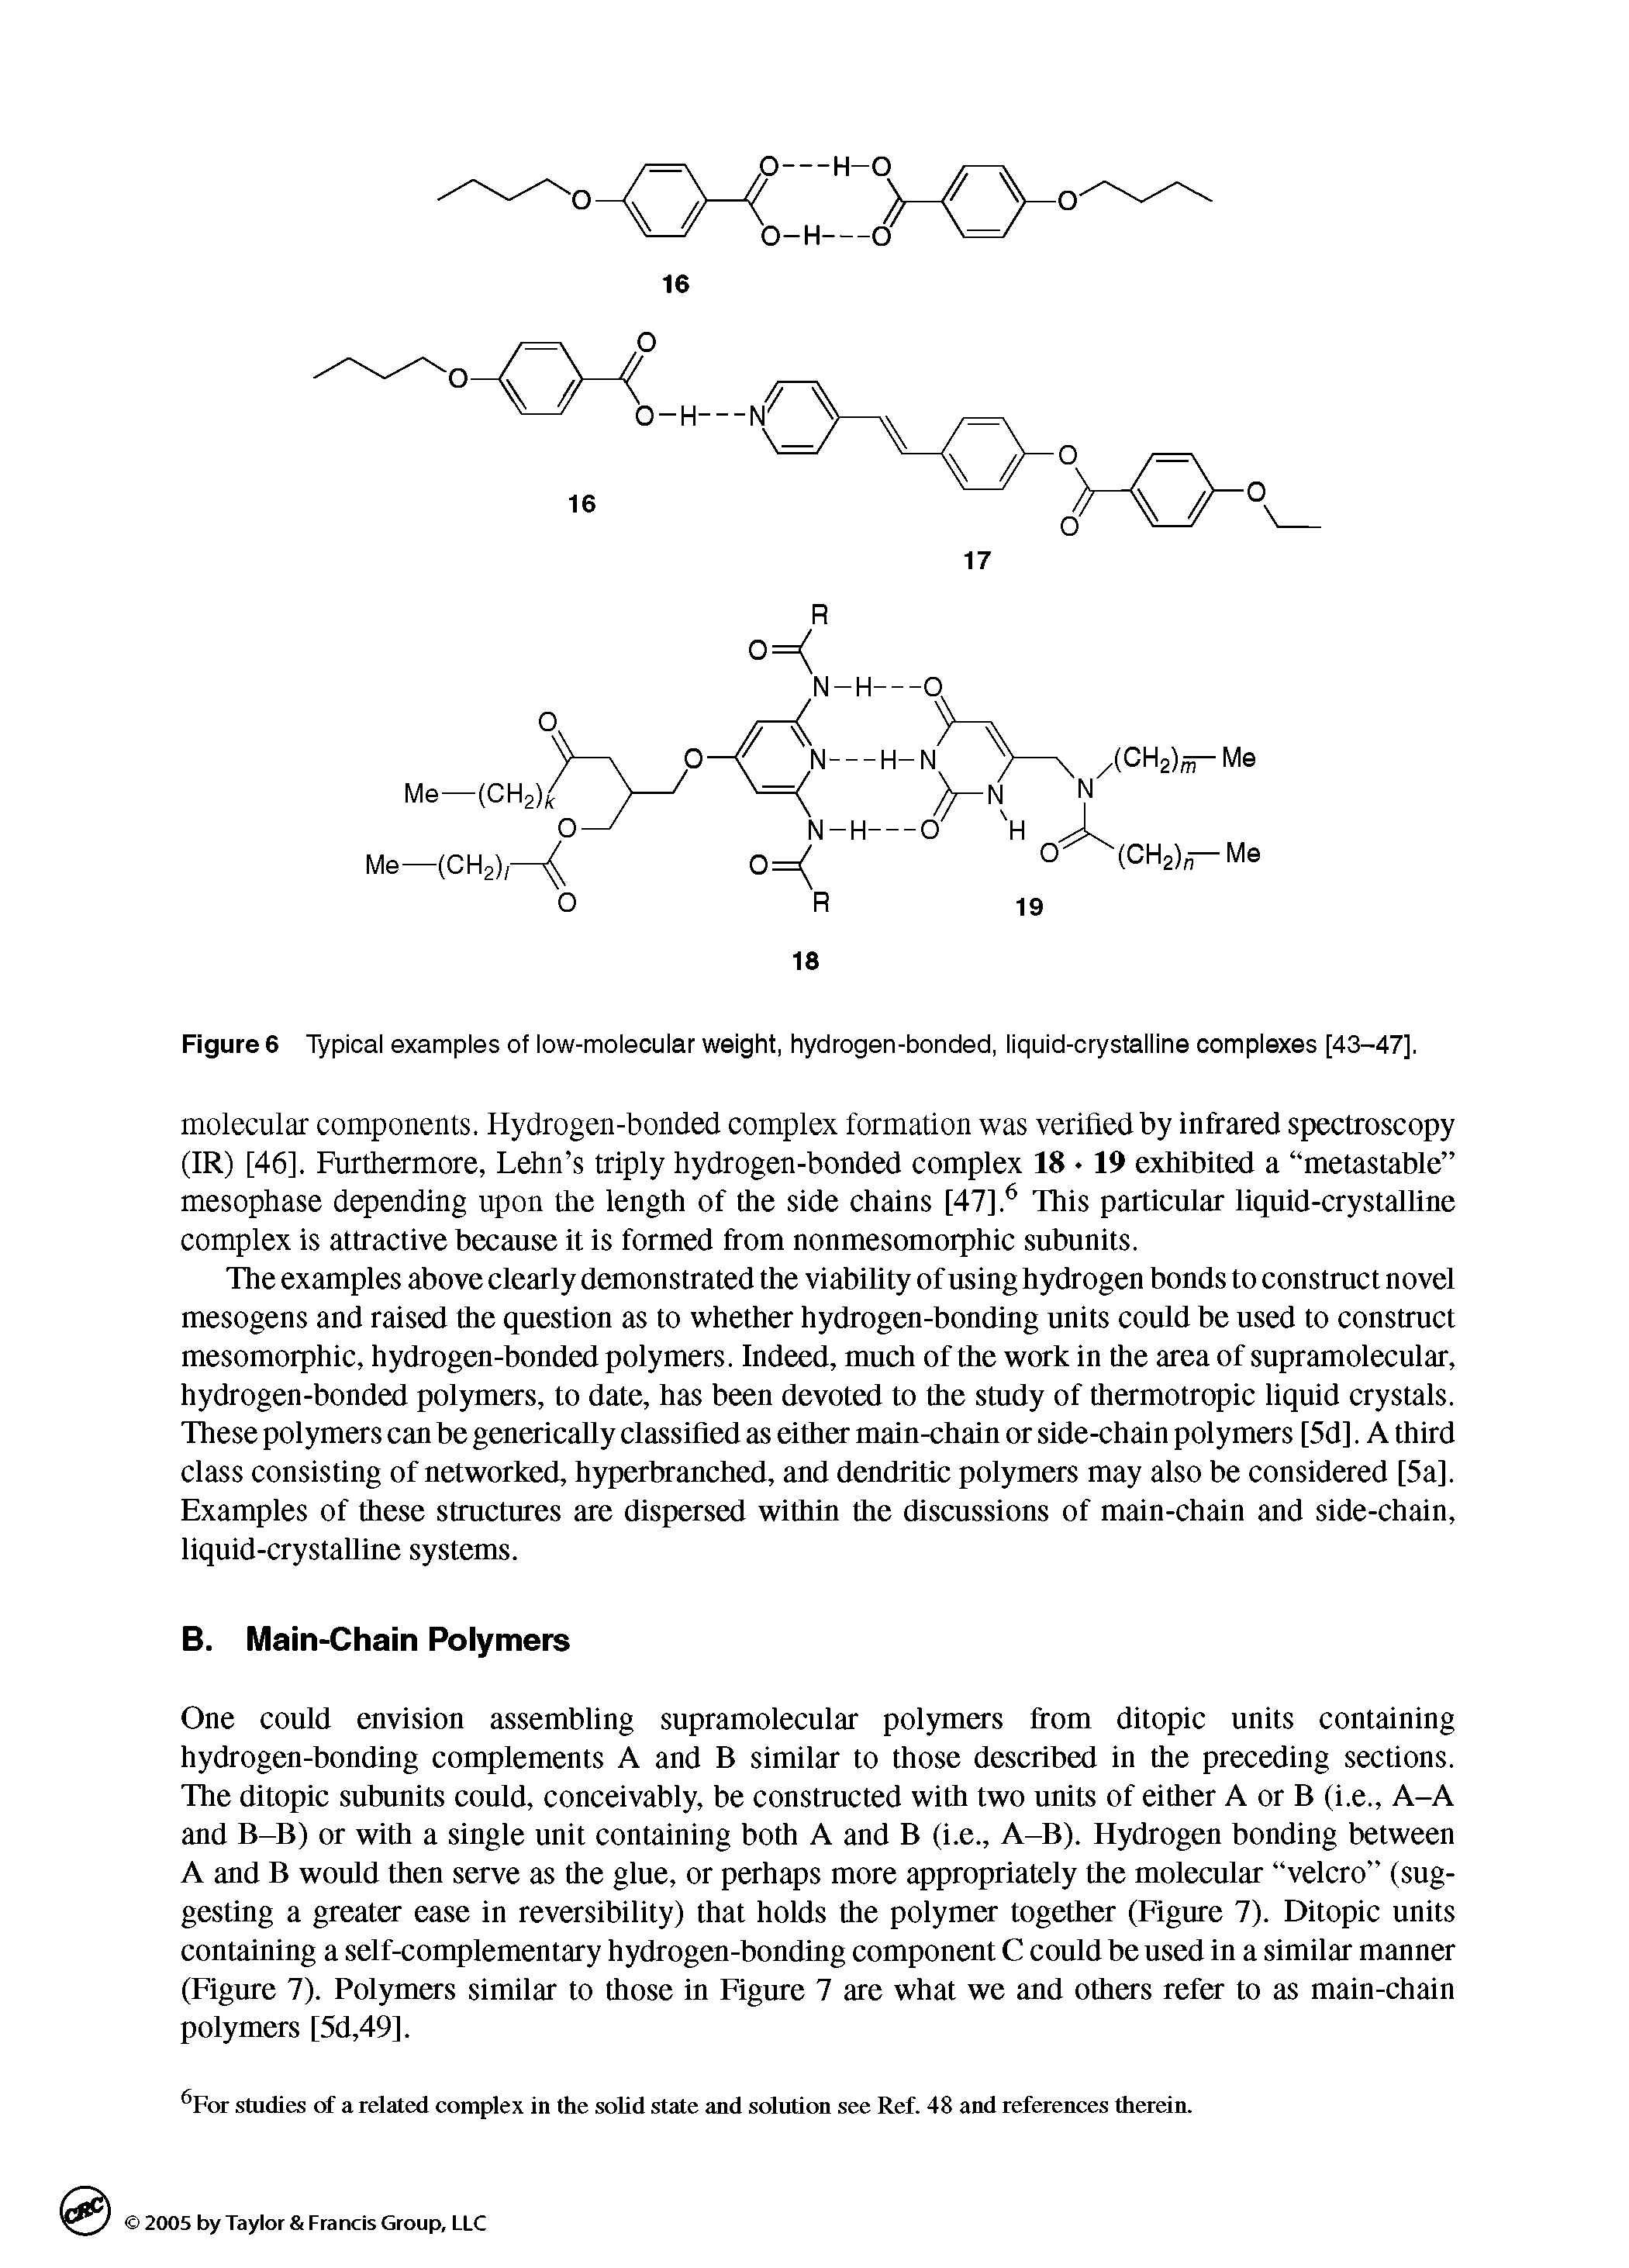 Figure 6 Typical examples of low-molecular weight, hydrogen-bonded, liquid-crystalline complexes [43-47],...